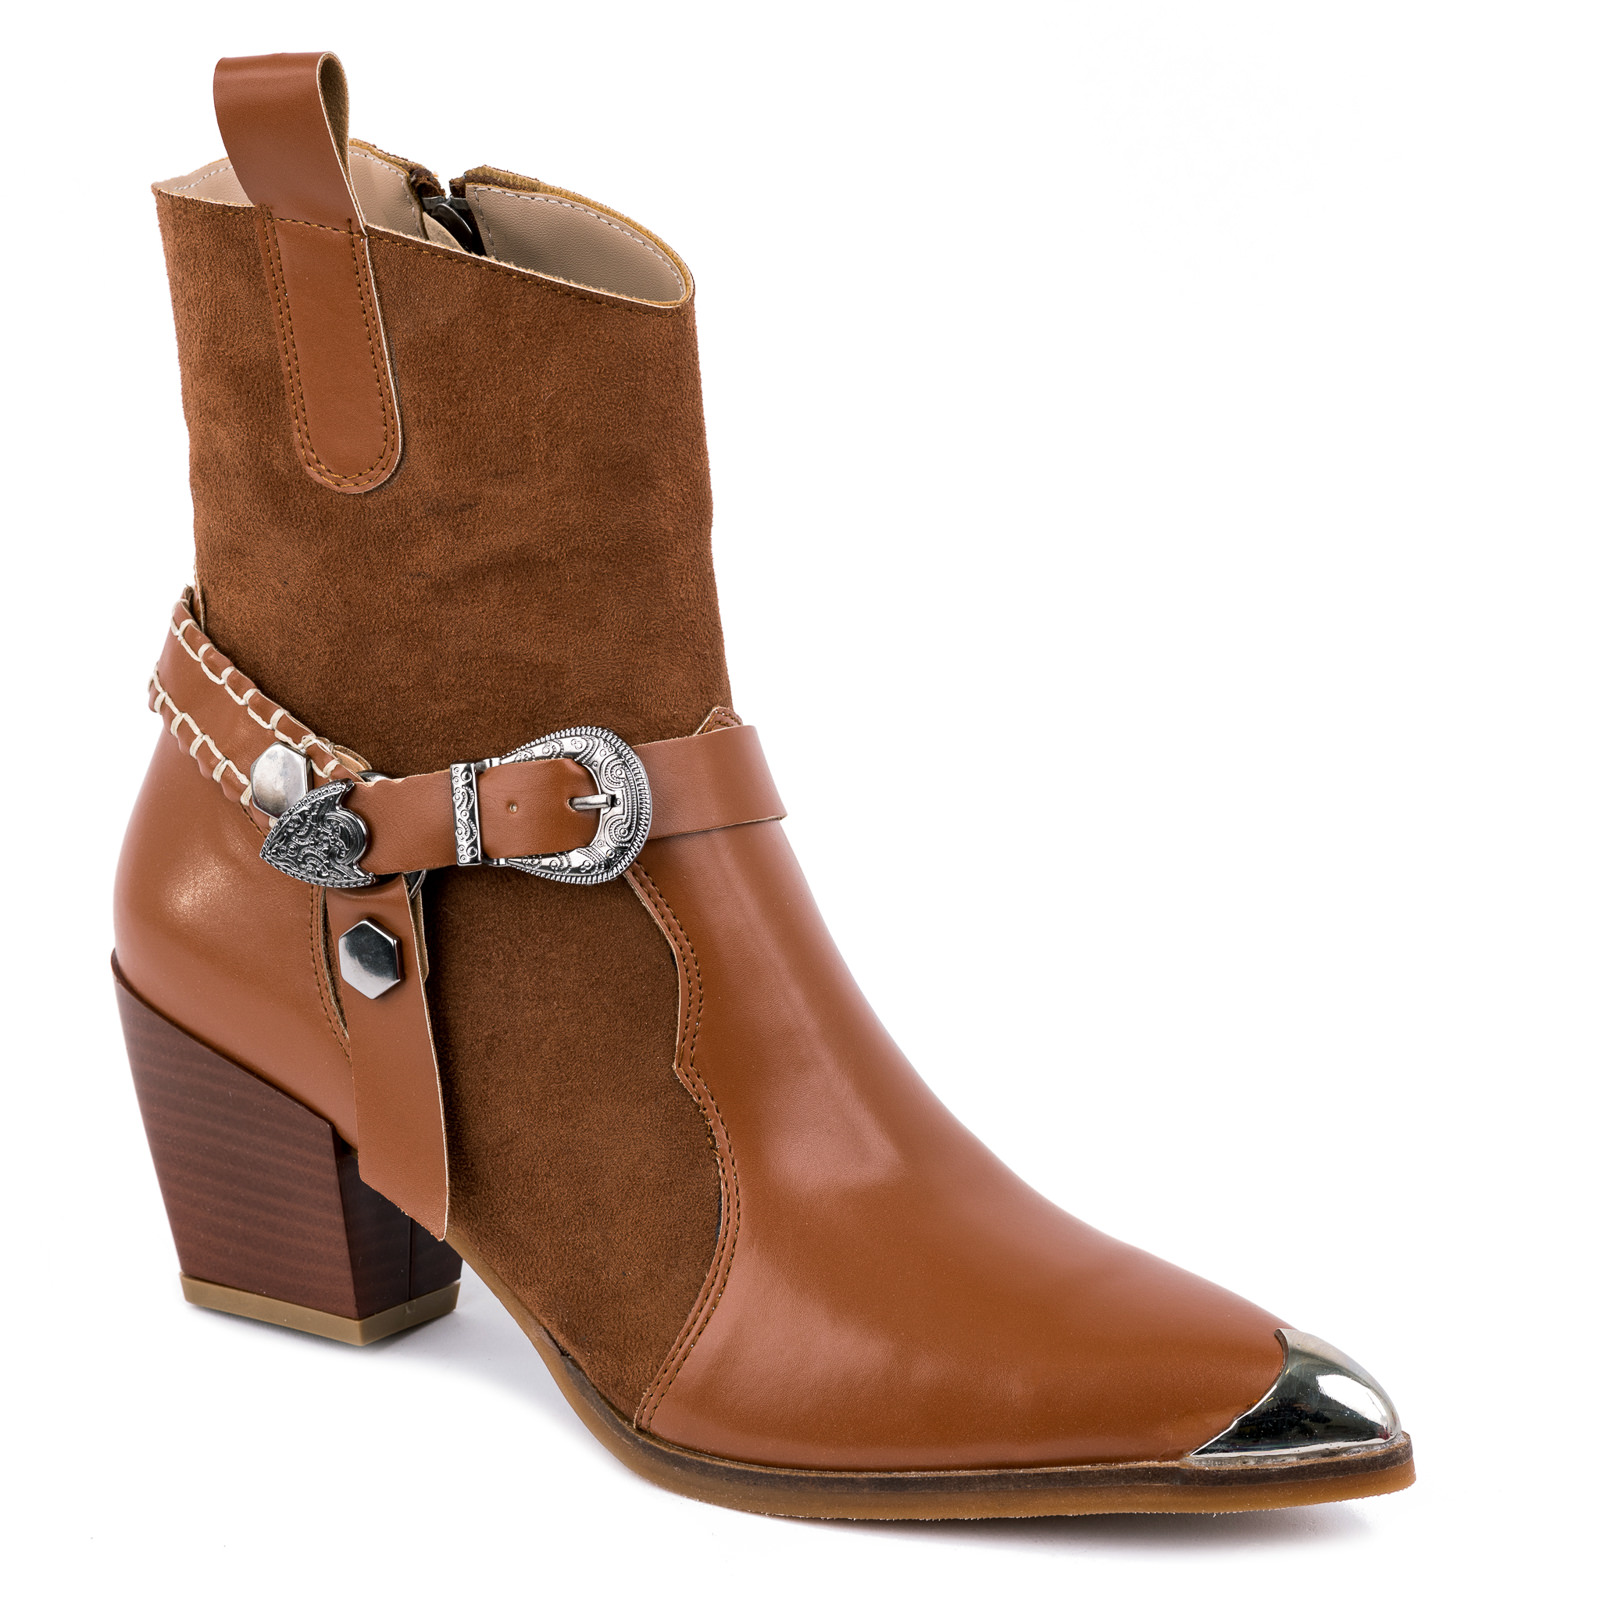 COW GIRL BOOTS WITH BELT AND THICK HEEL - CAMEL